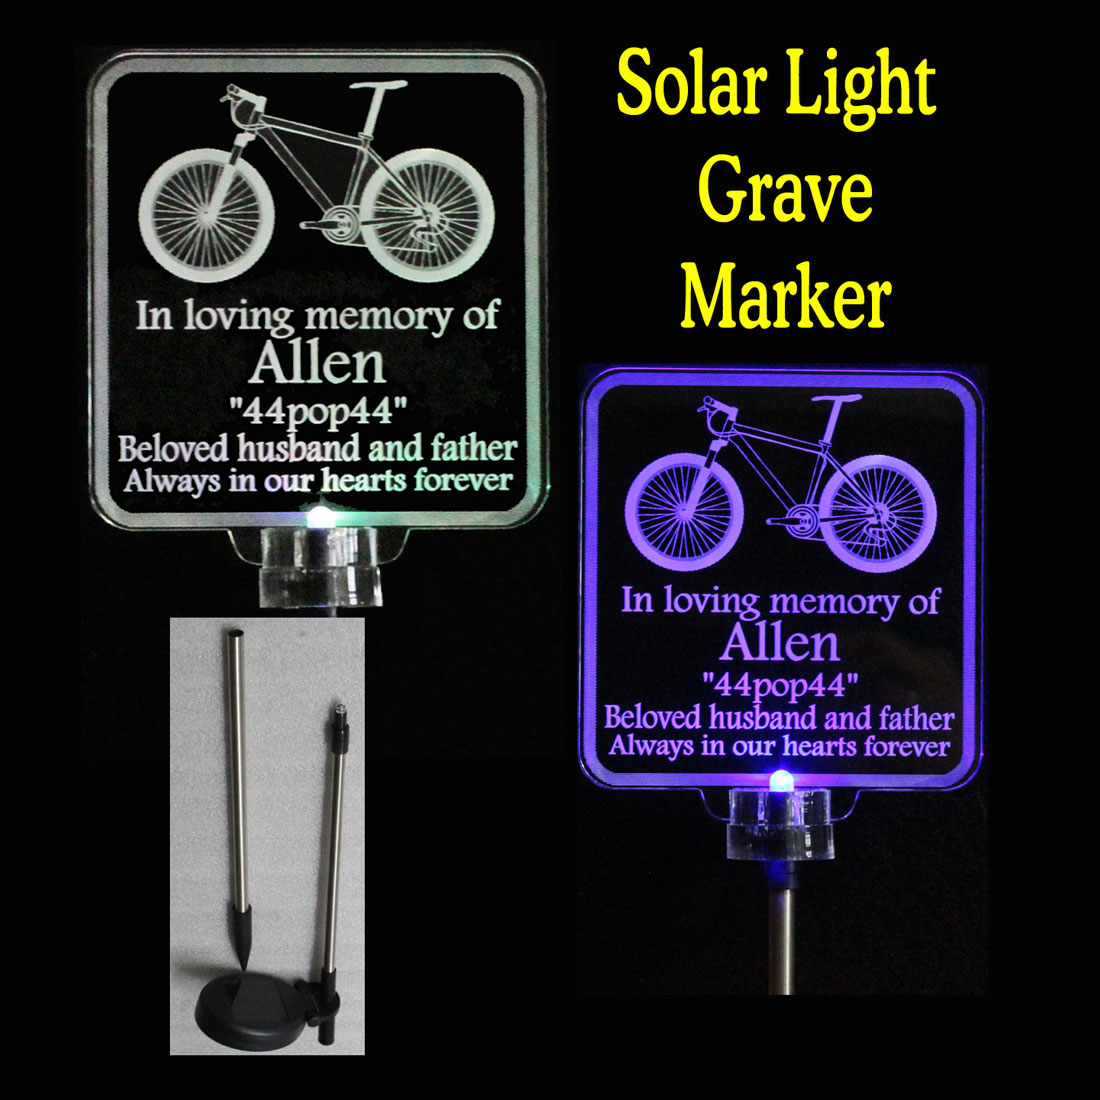 Bicycle Cemetery marker, Bike solar light grave marker, personalized